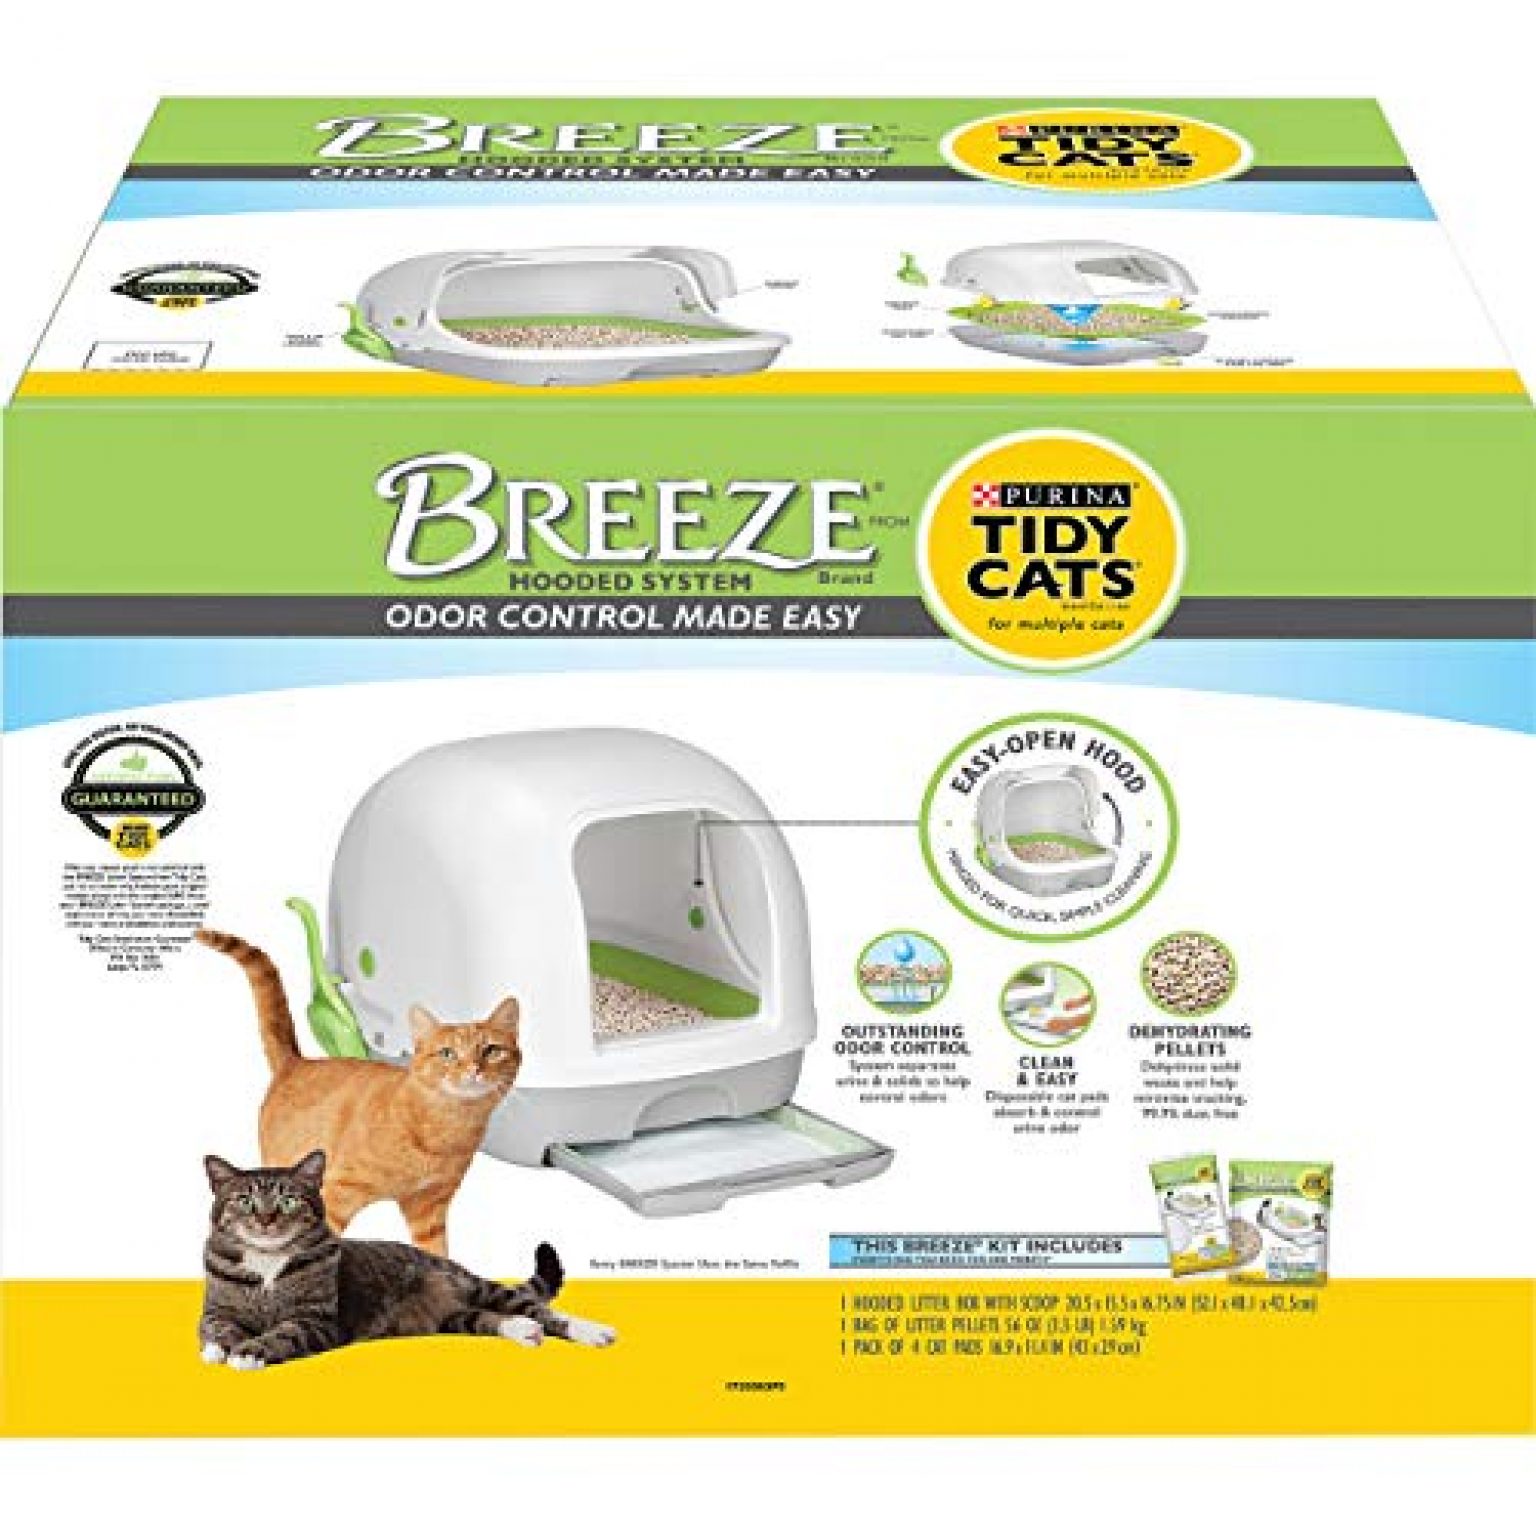 Purina Tidy Cats Breeze Hooded Litter Box System — Deals from SaveaLoonie!